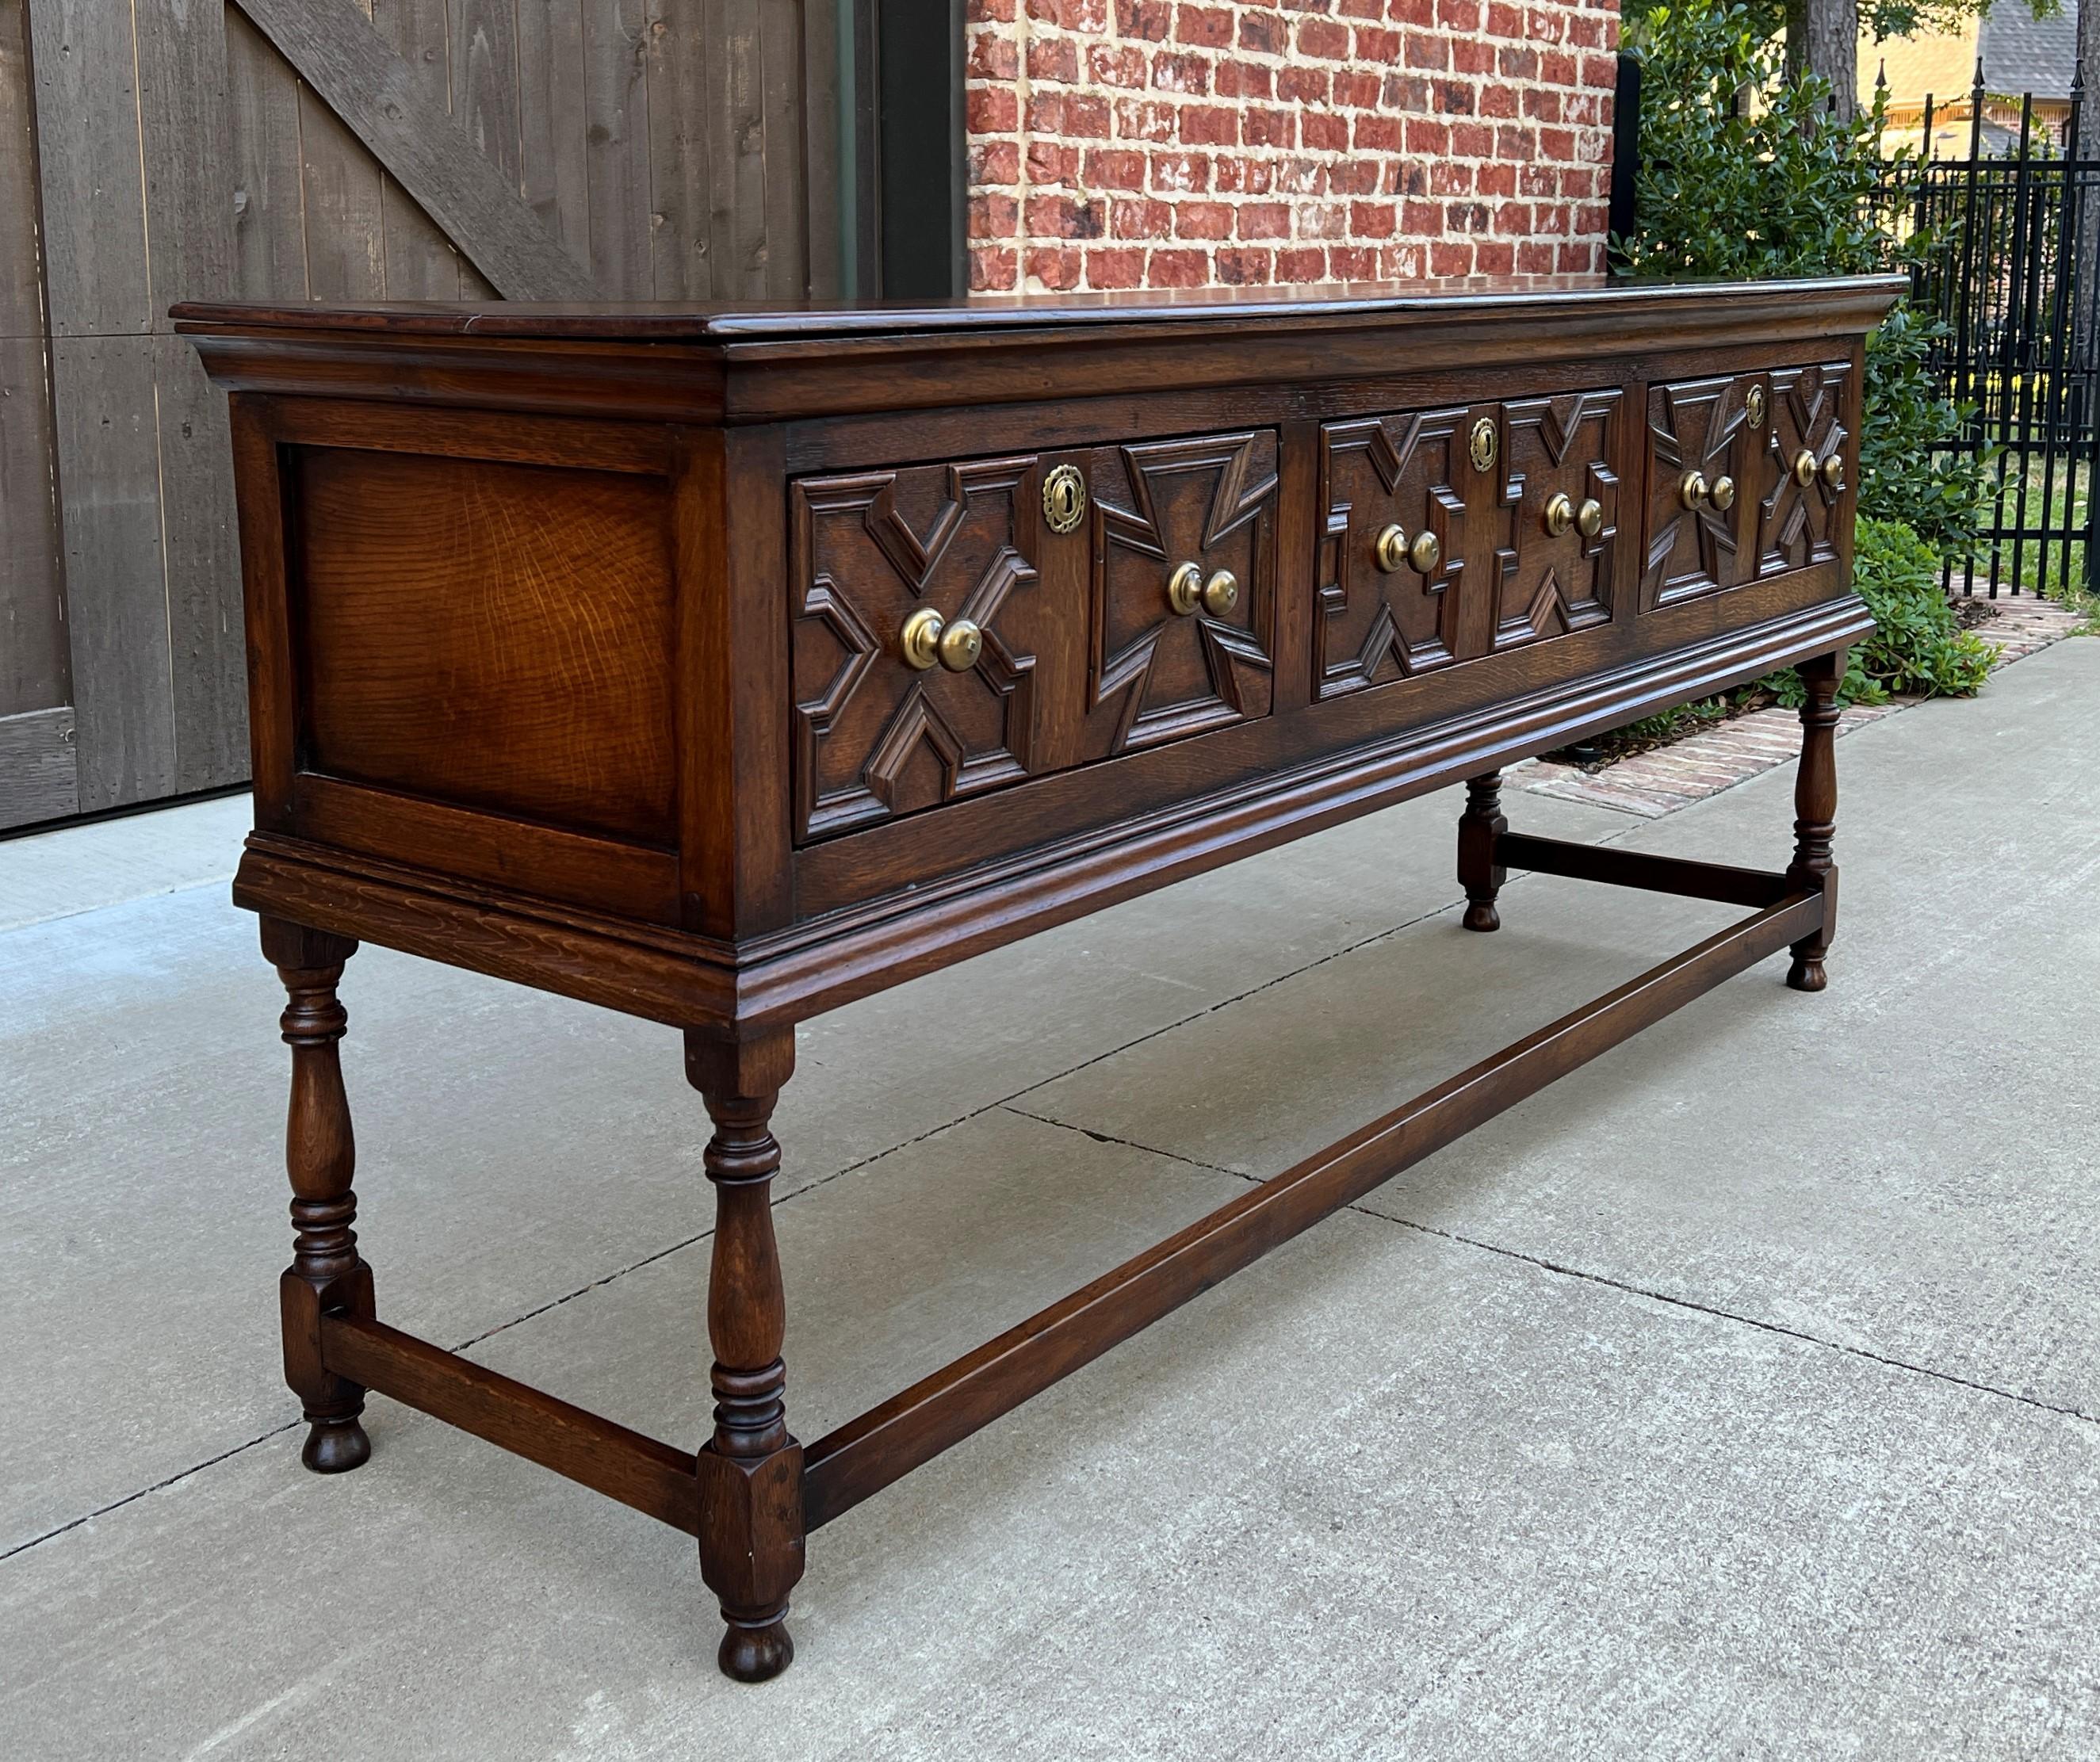 BEAUTIFUL Antique English oak Jacobean server, sideboard, sofa table, console, or buffet with three srawers~~c. 1890s.


Full of character and classic English Jacobean style sideboard, server, or sofa table~~display your favorite Majolica, Imari,